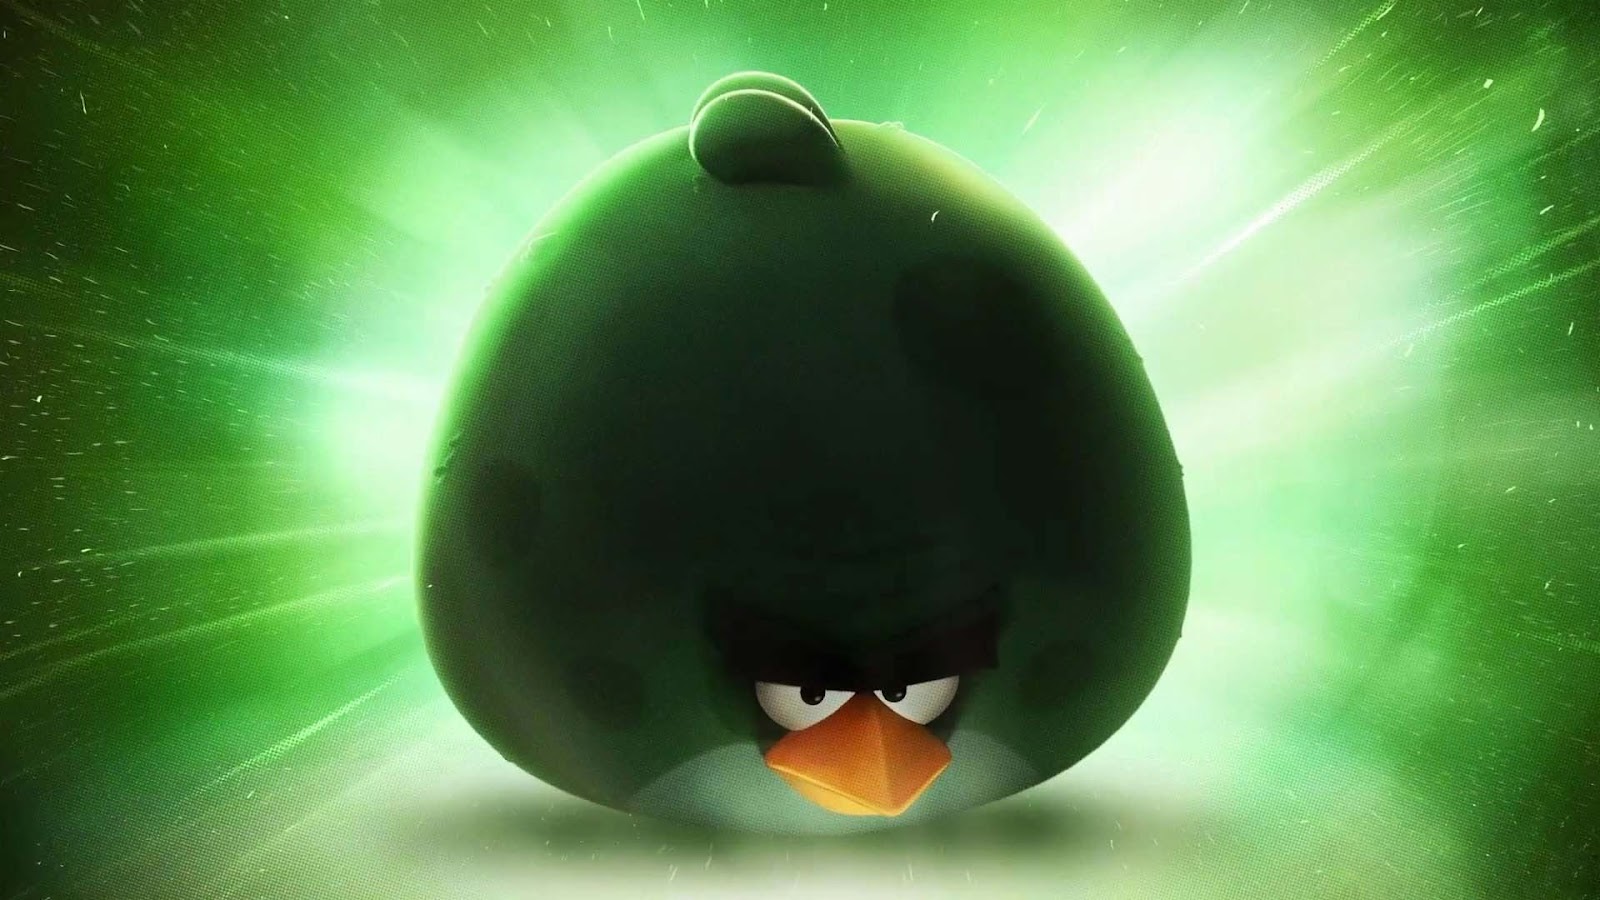 30 WALLPAPER HD ANGRY BIRDS SERIES World HD Wallpapers